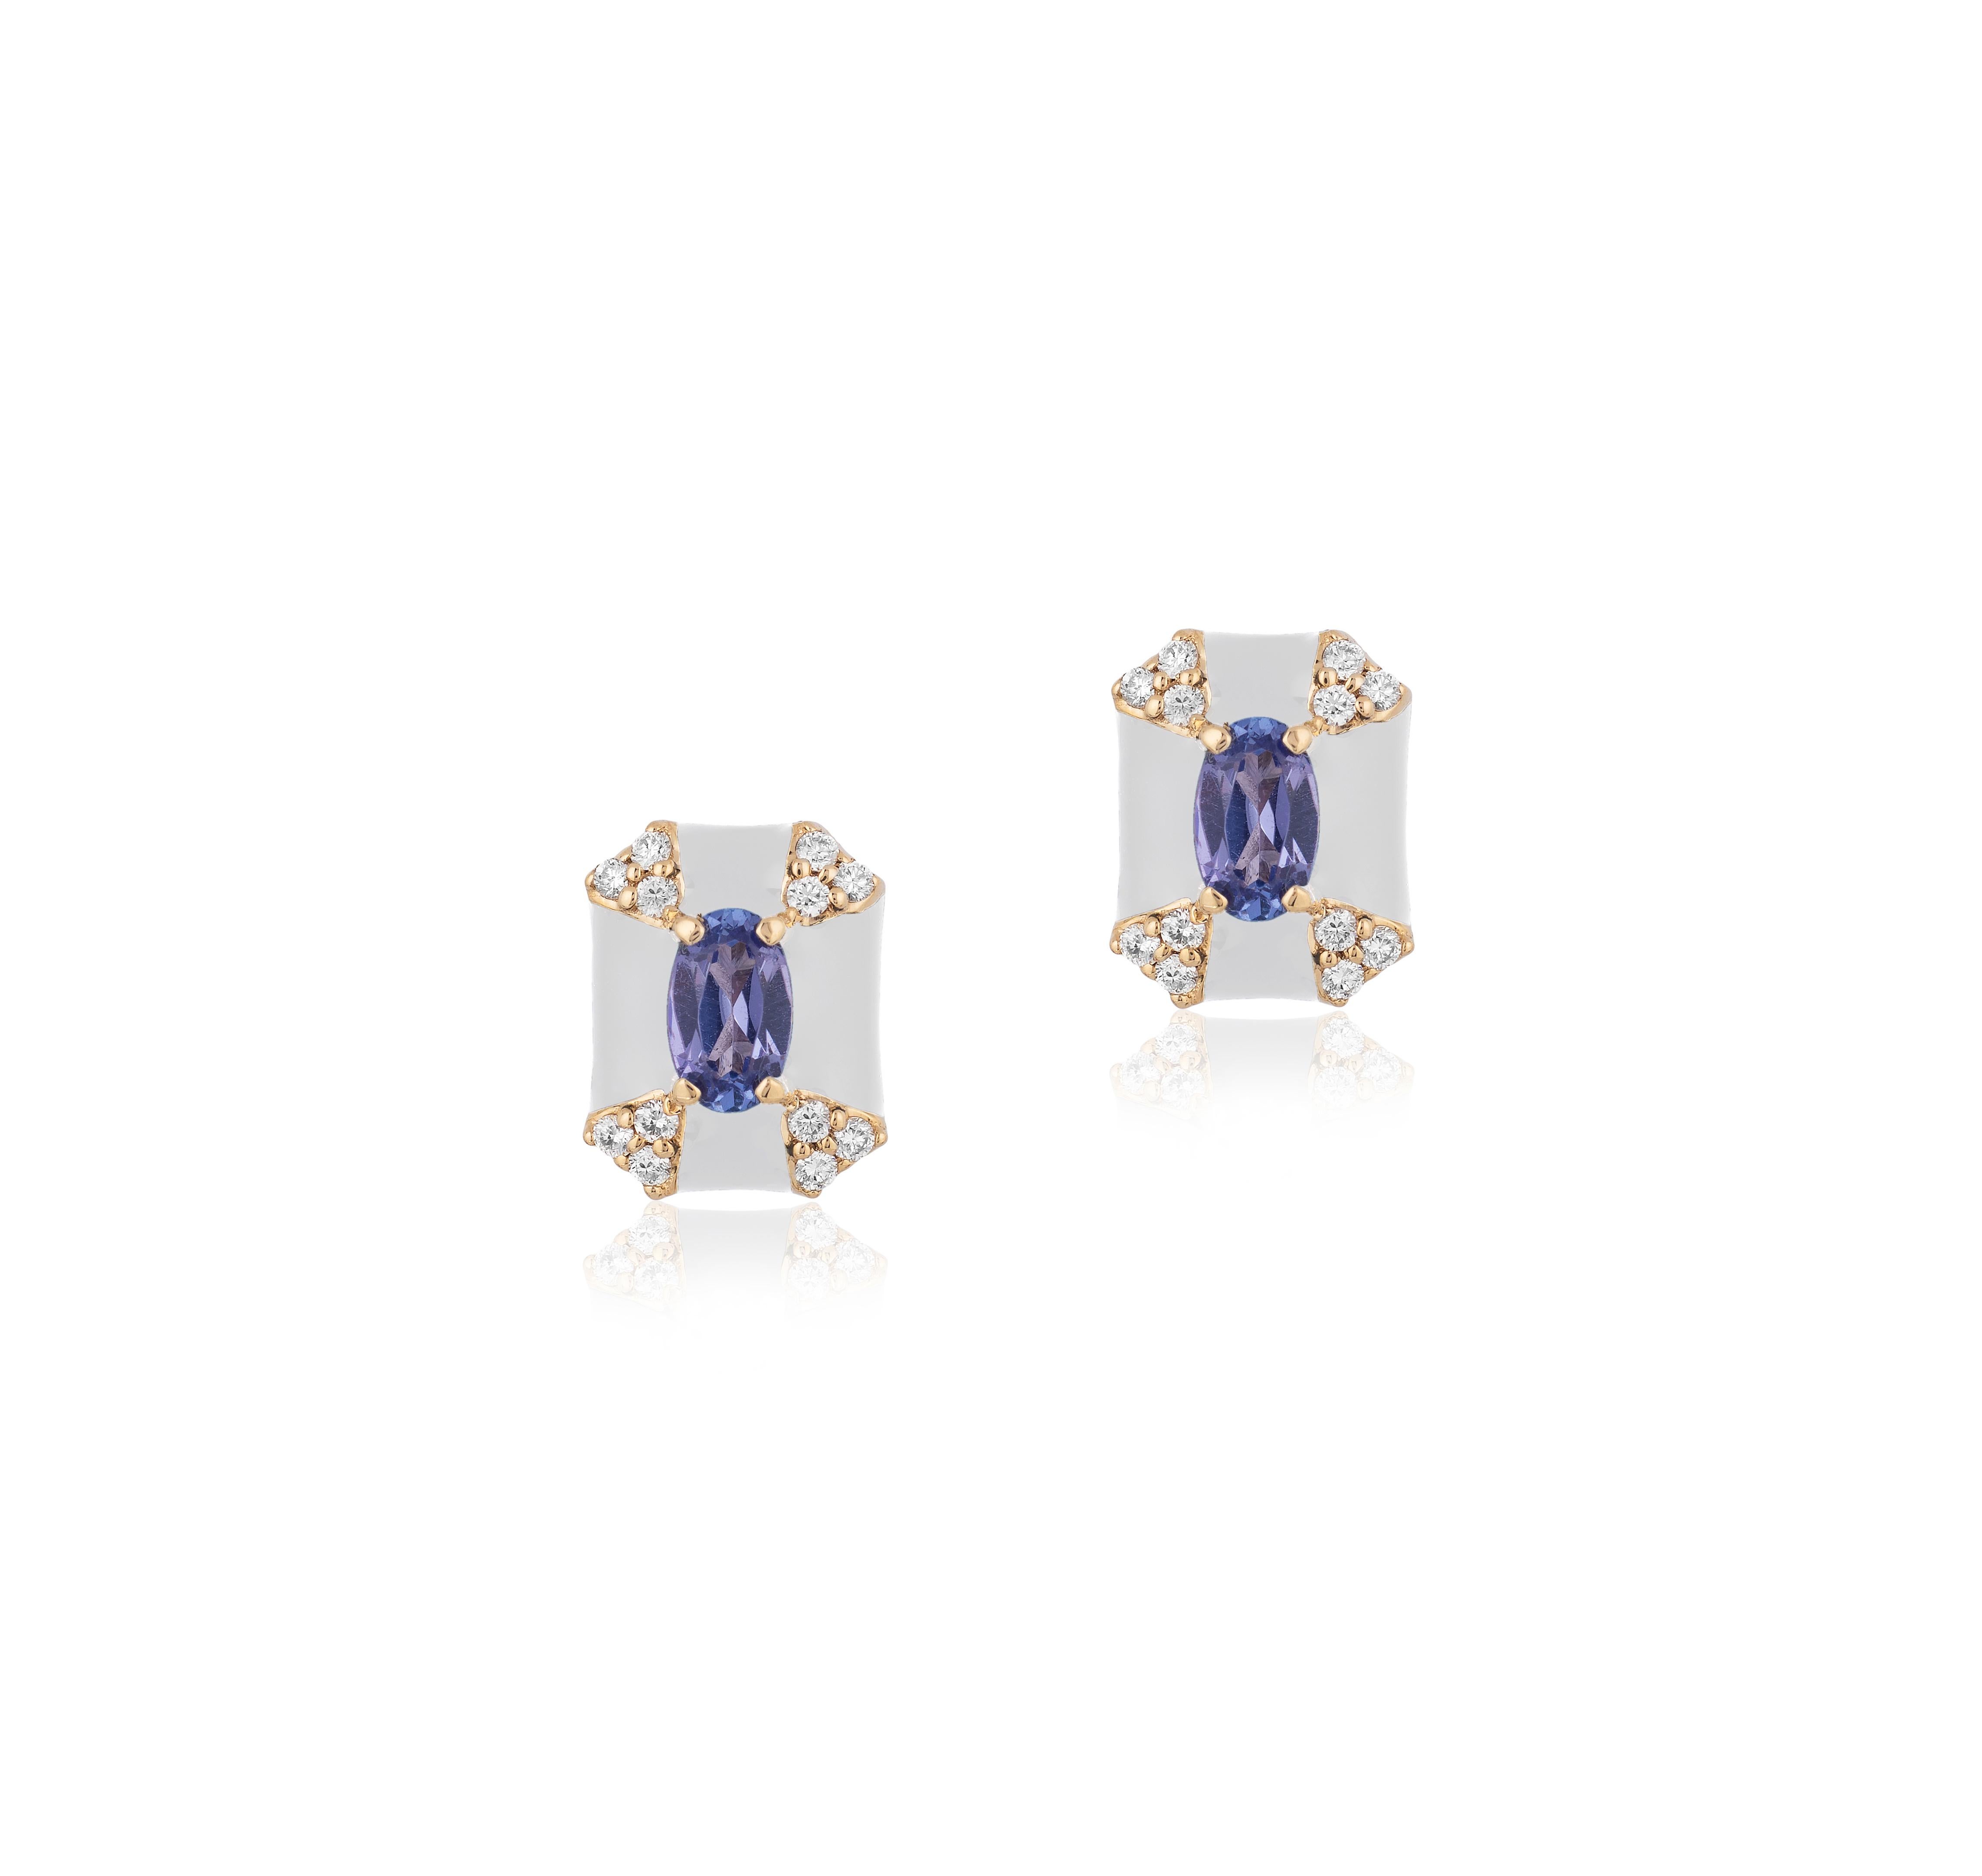 'Queen' Octagon White Enamel Stud Earrings with Sapphire and Diamonds in 18K Yellow Gold.
Stone Size: 4 mm
Gemstone Approx. Wt: Sapphire- 0.62 Carats 
Diamonds: G-H / VS, Approx. Wt: 0.14 Carats